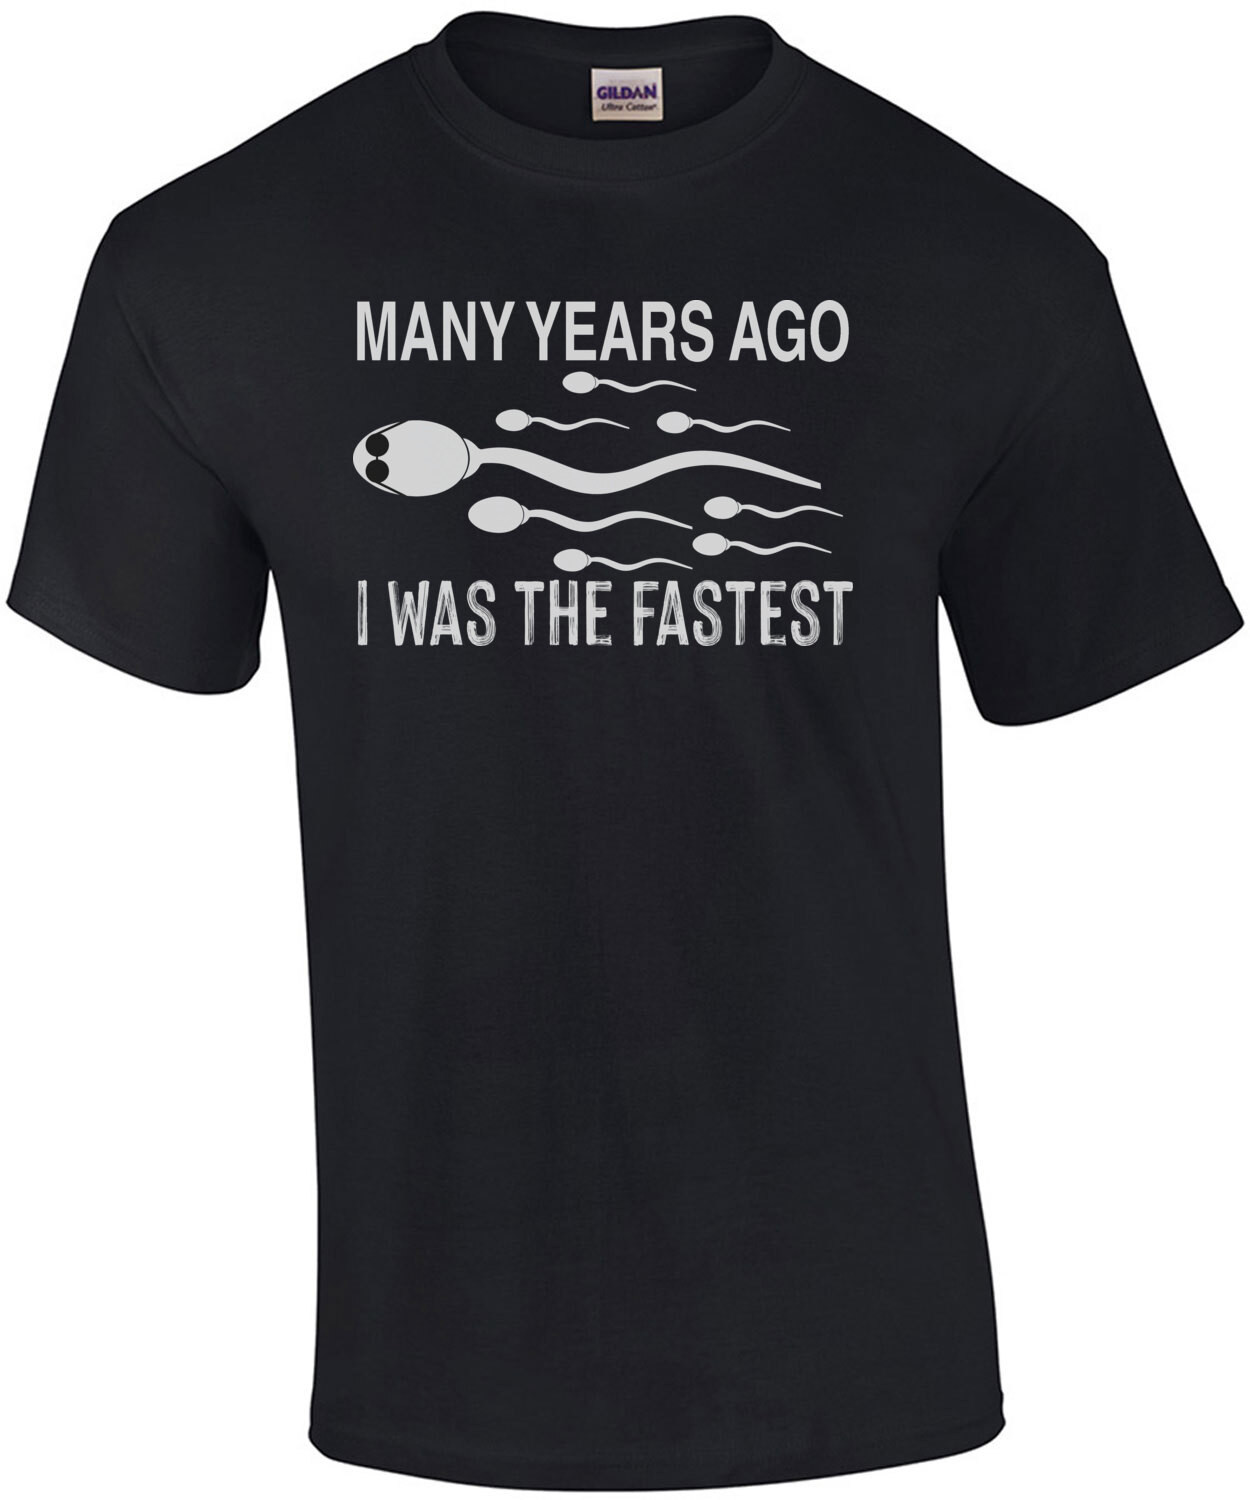 Many Years Ago I Was The Fastest Funny Shirt